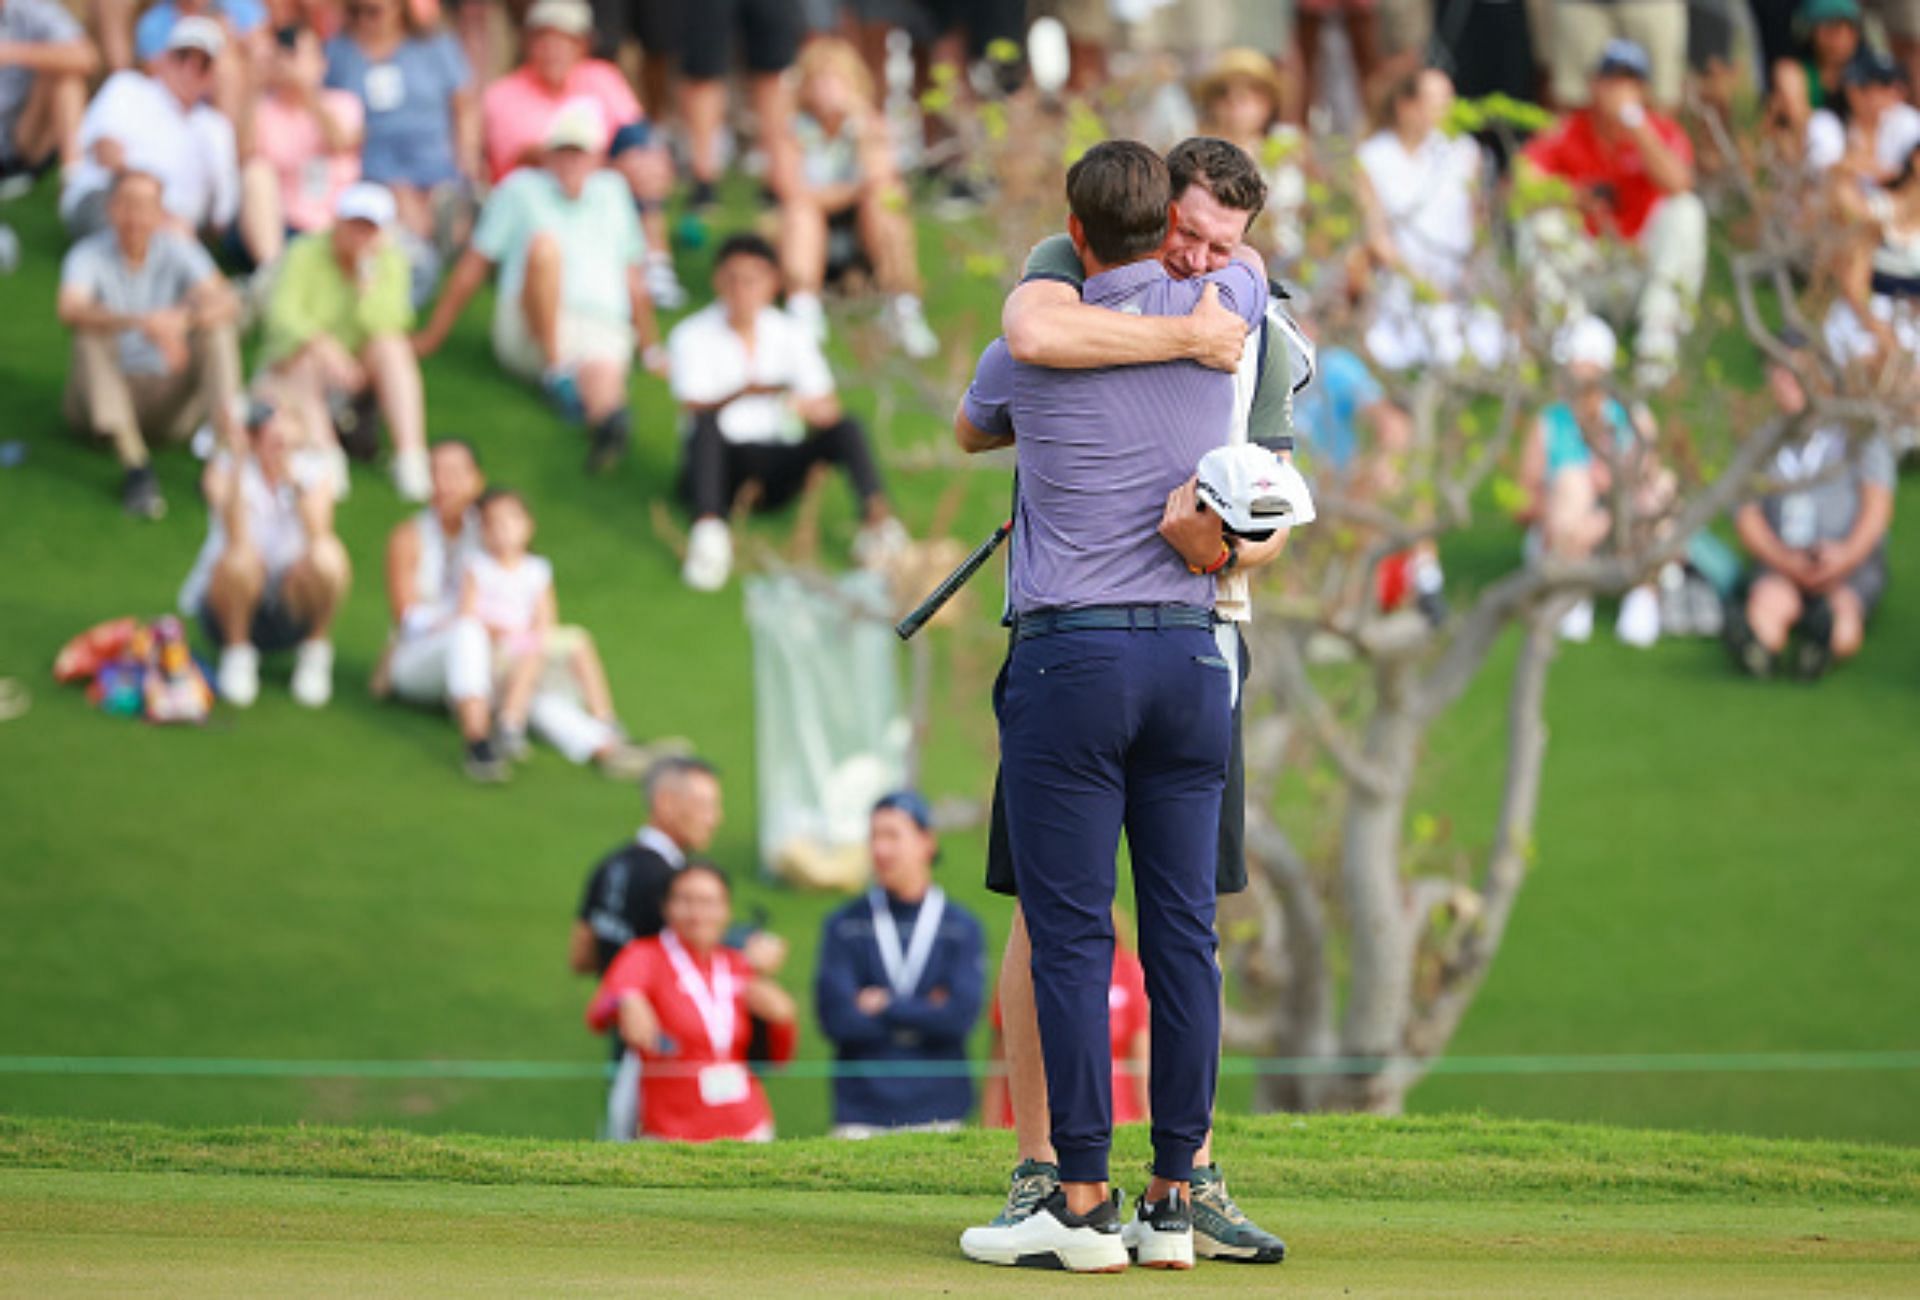 The embrace of Erik van Rooyen and his caddie Alex Gaugert, one of the most emotional moments of the 2023 season (Image via Getty).